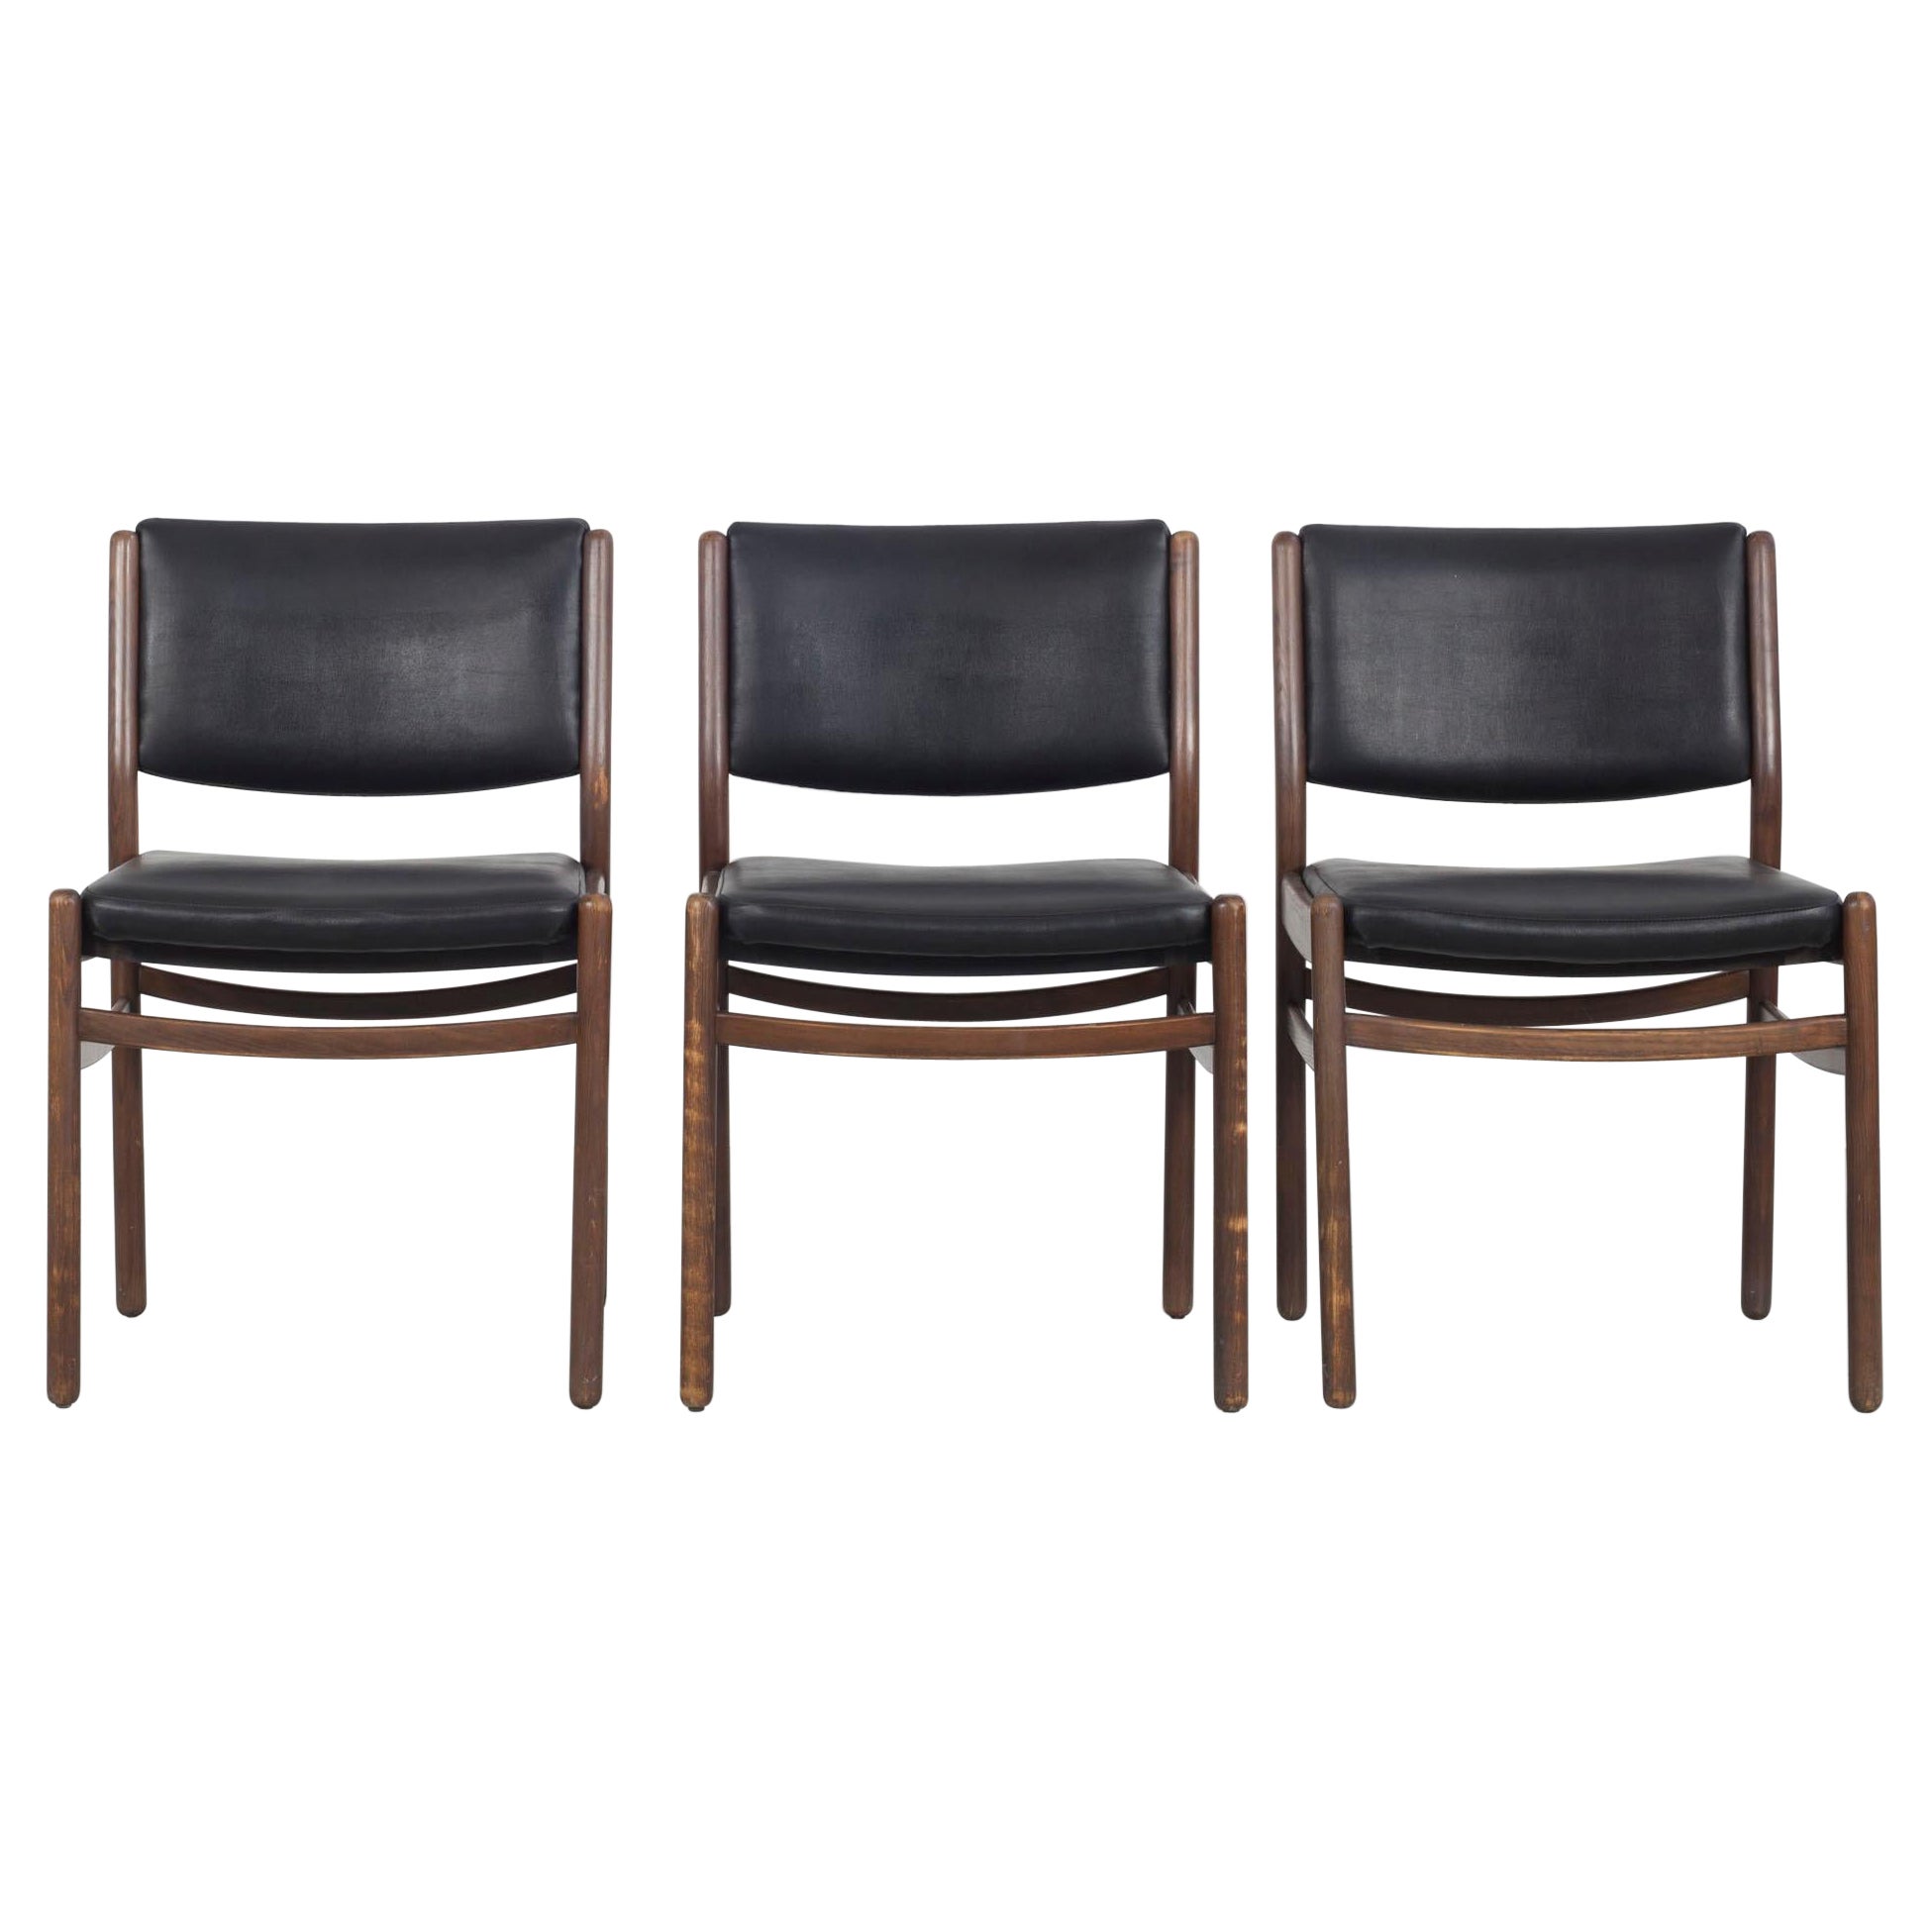 Set of Three Wooden Chairs with Black Leatherette Upholstery, Italy 60s For Sale